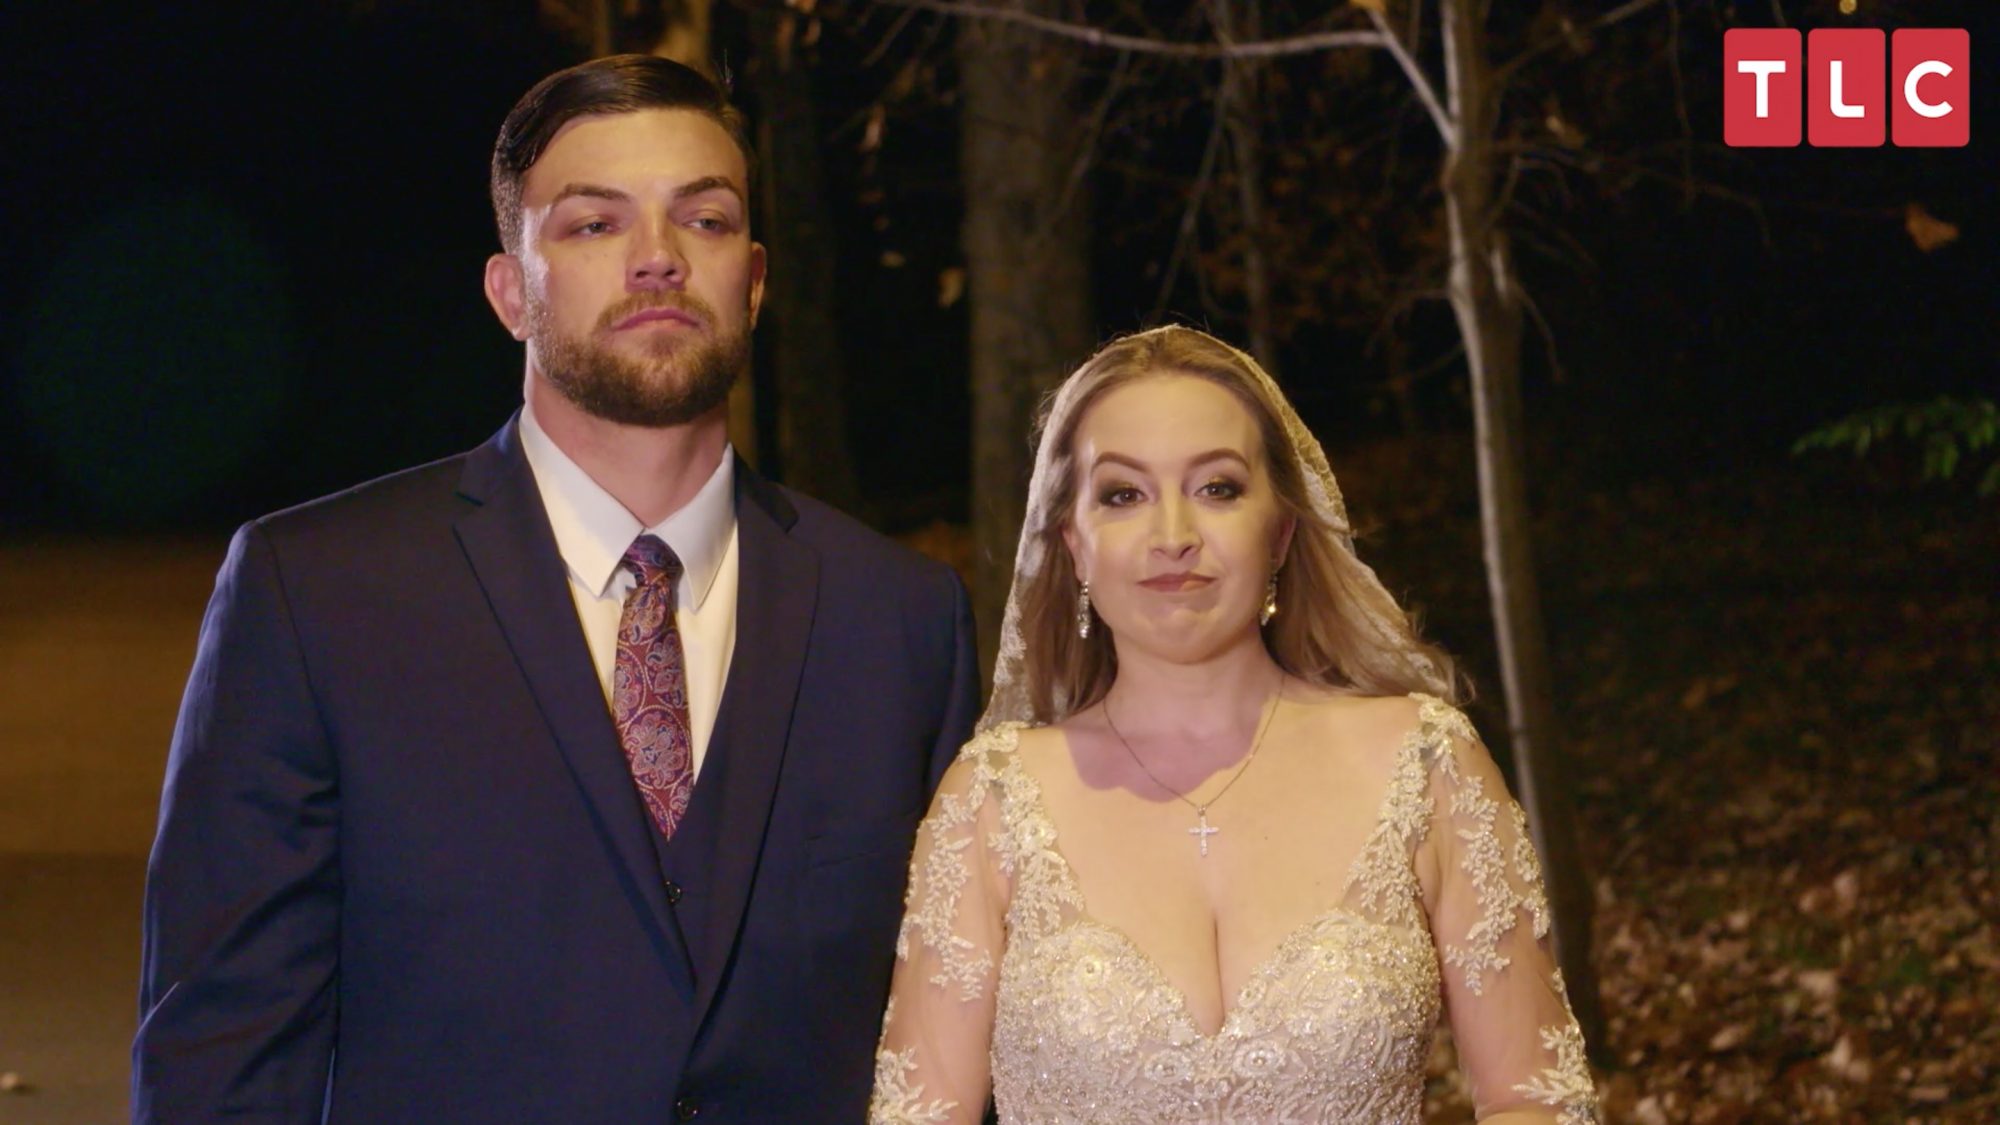 Elizabeth Potthast wearing a wedding dress and Andrei Castravet wearing a tux on their wedding day on '90 Day Fiance'.